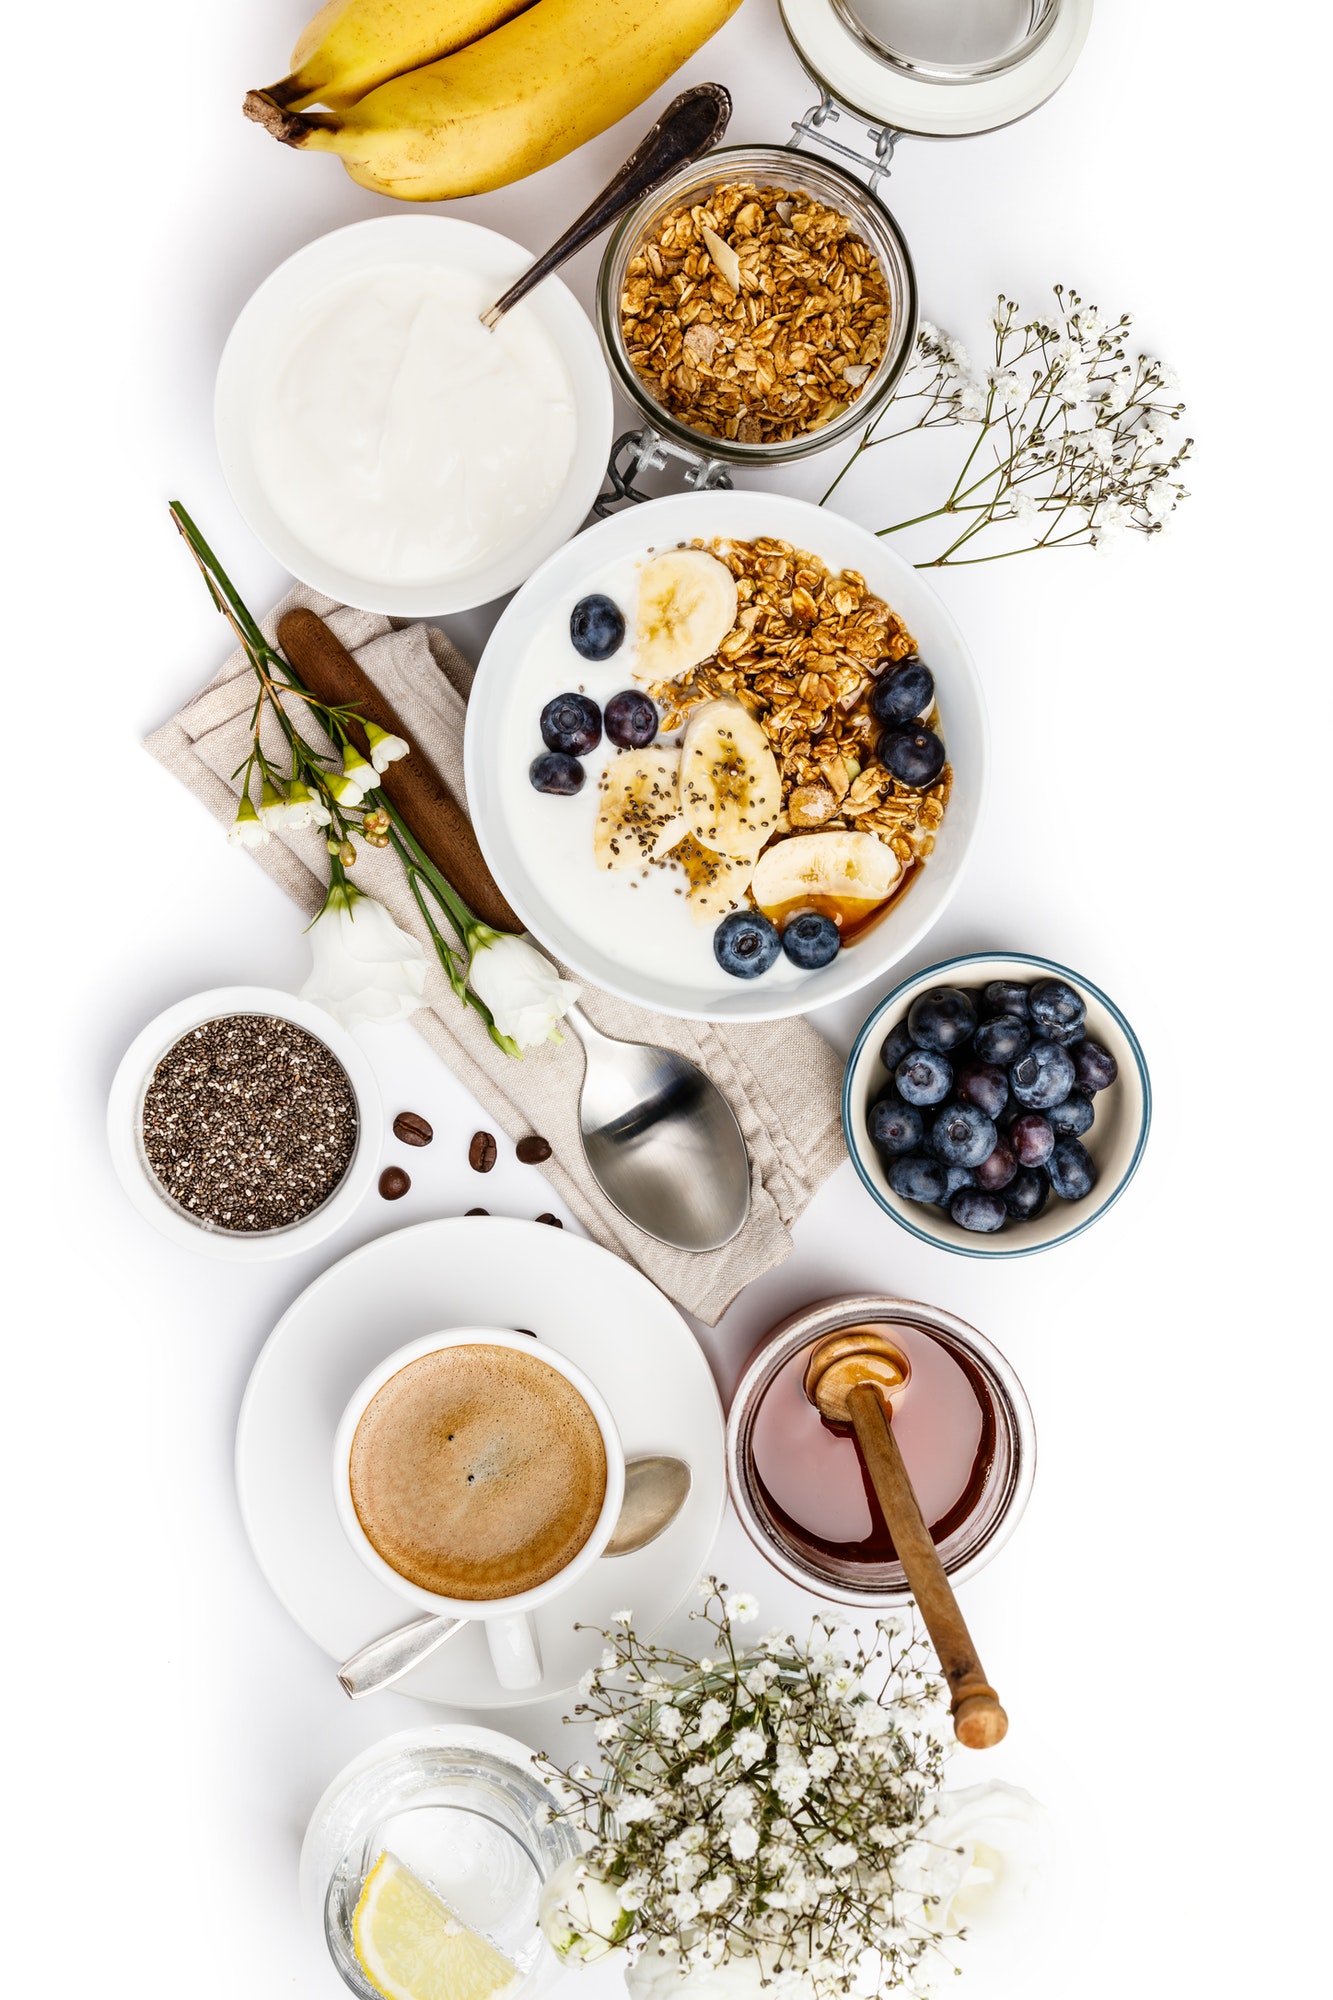 Healthy breakfast set on white background, top view, copy space